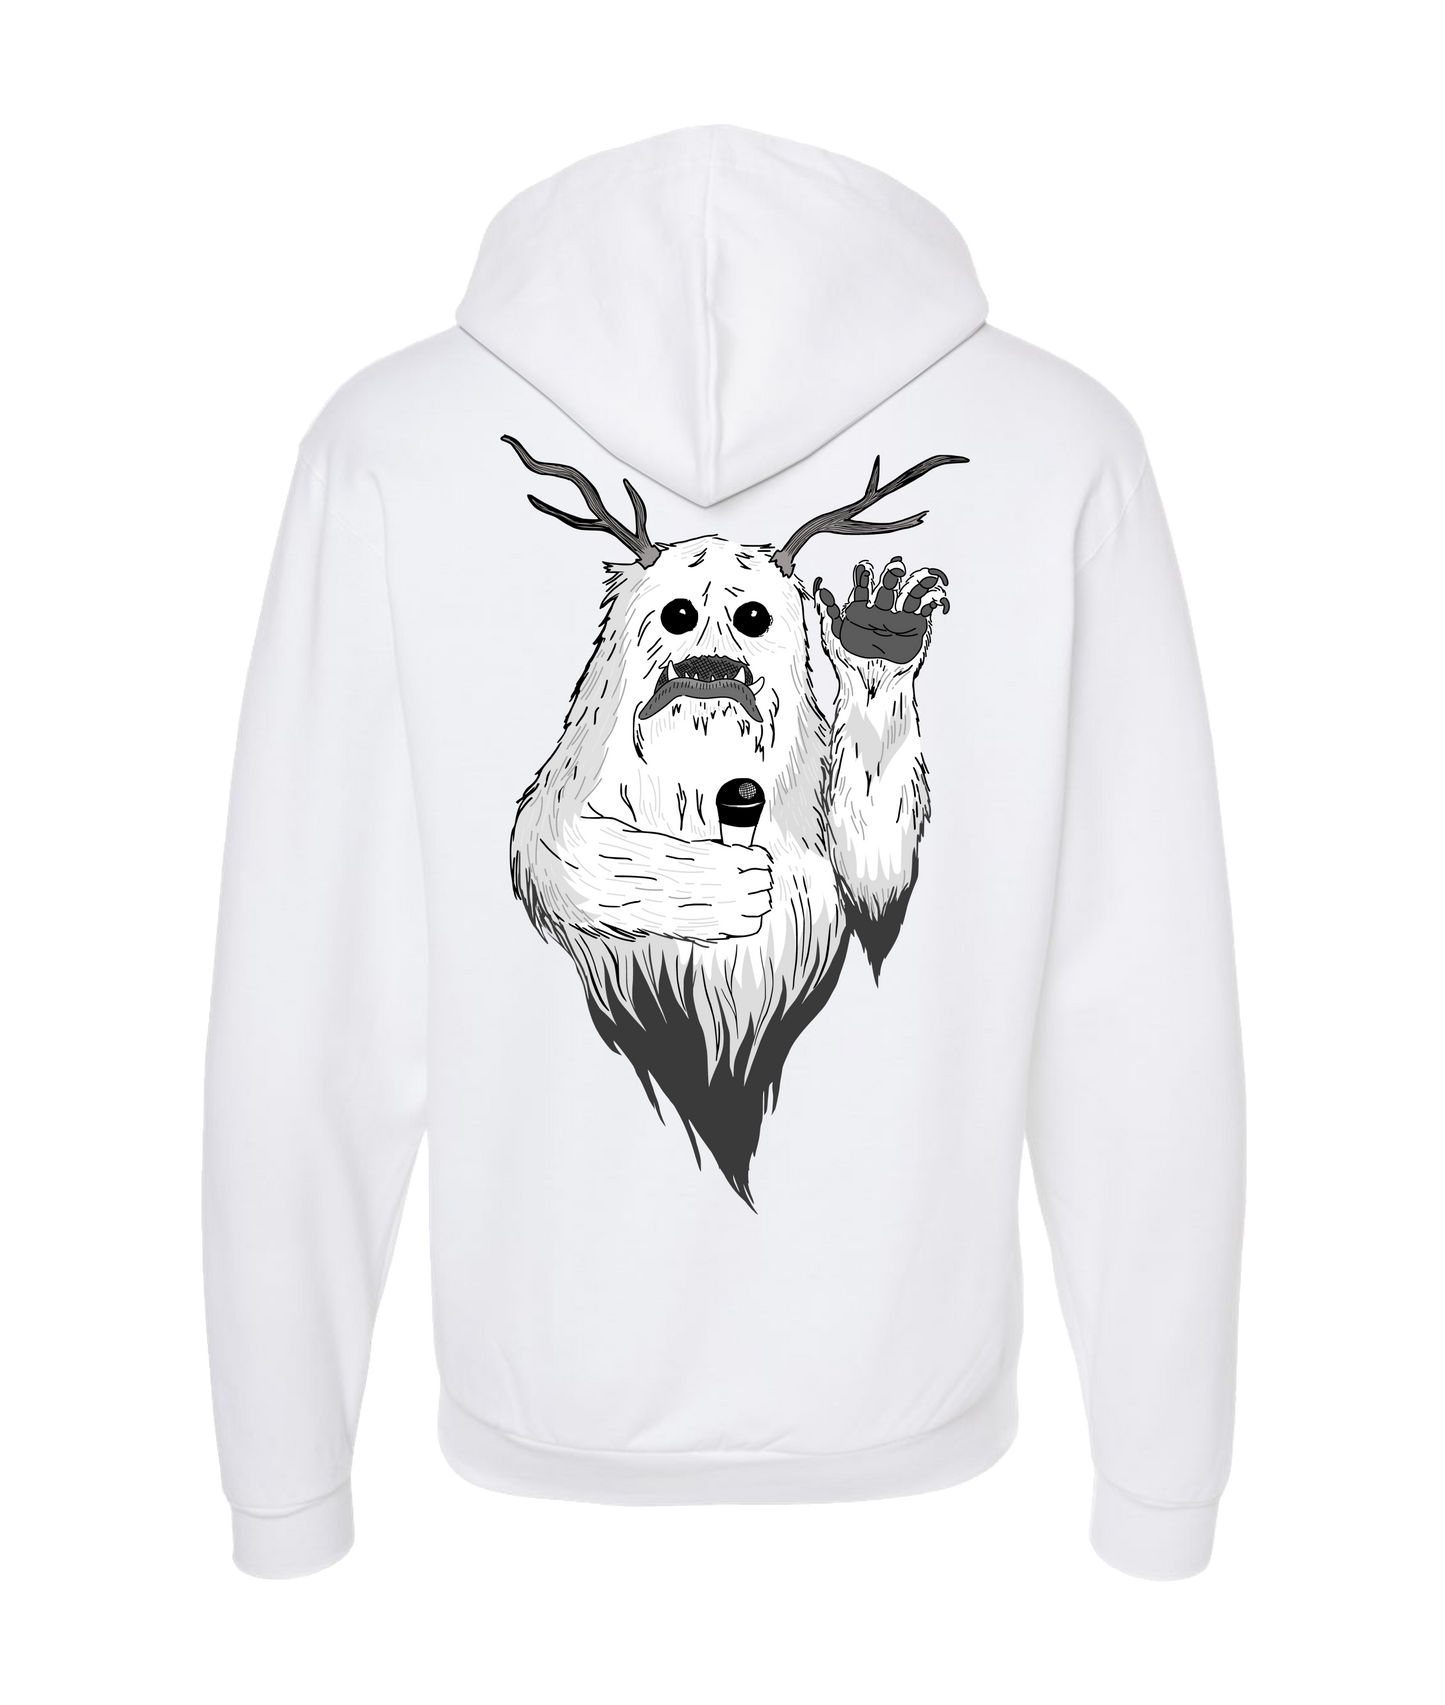 Sparks Across Darkness - Sparky - White Zip Up Hoodie